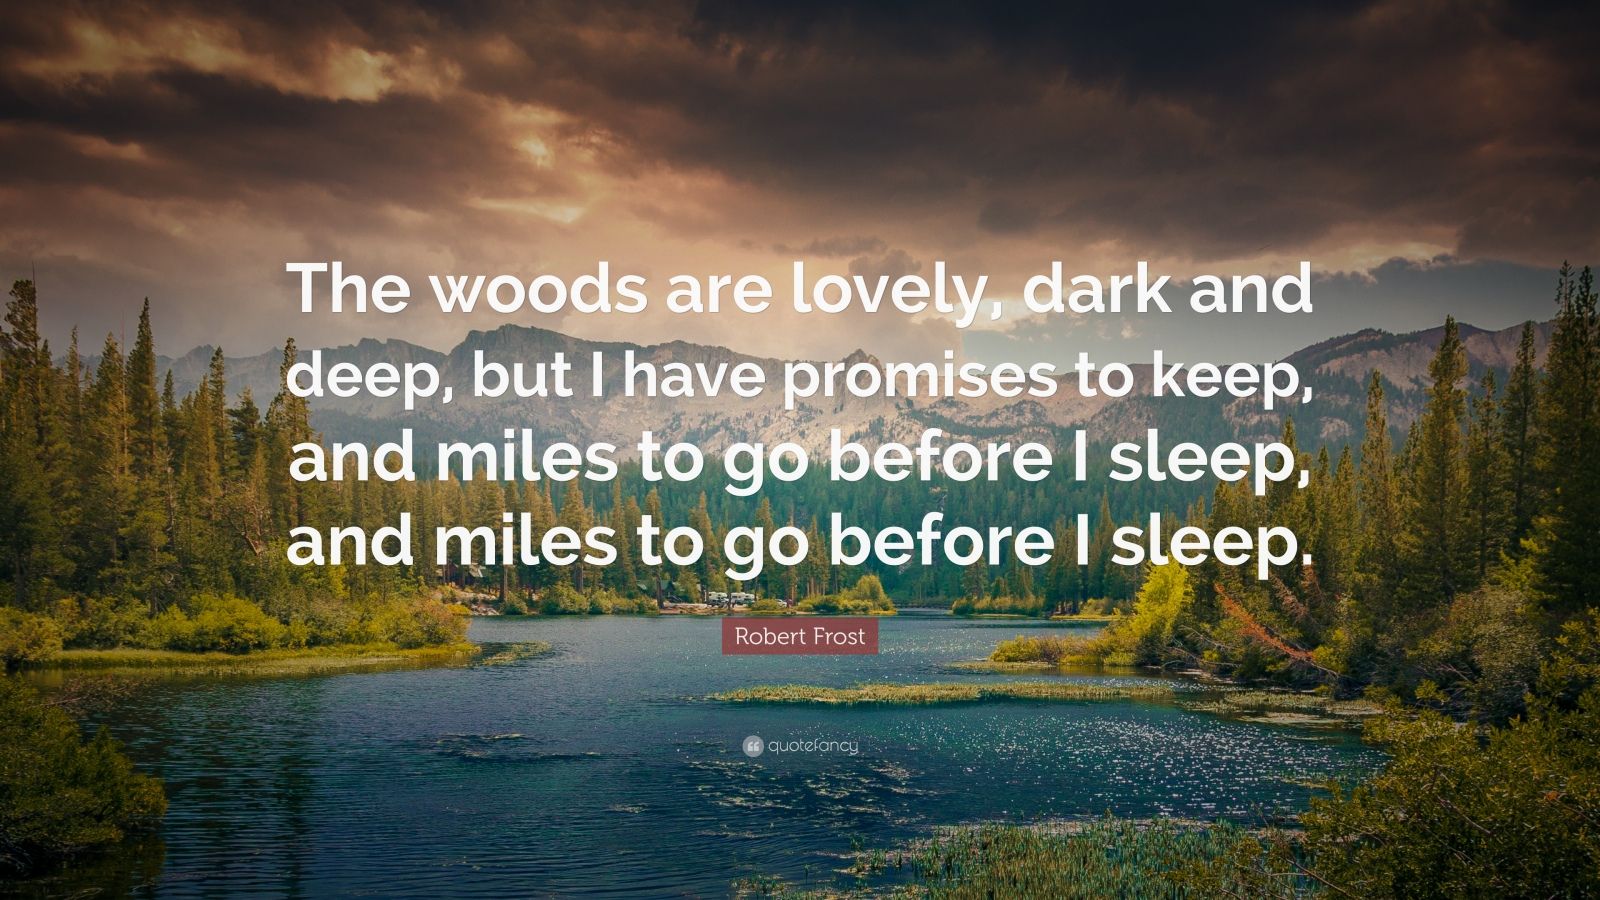 Robert Frost Quote: “The woods are lovely, dark and deep, but I have